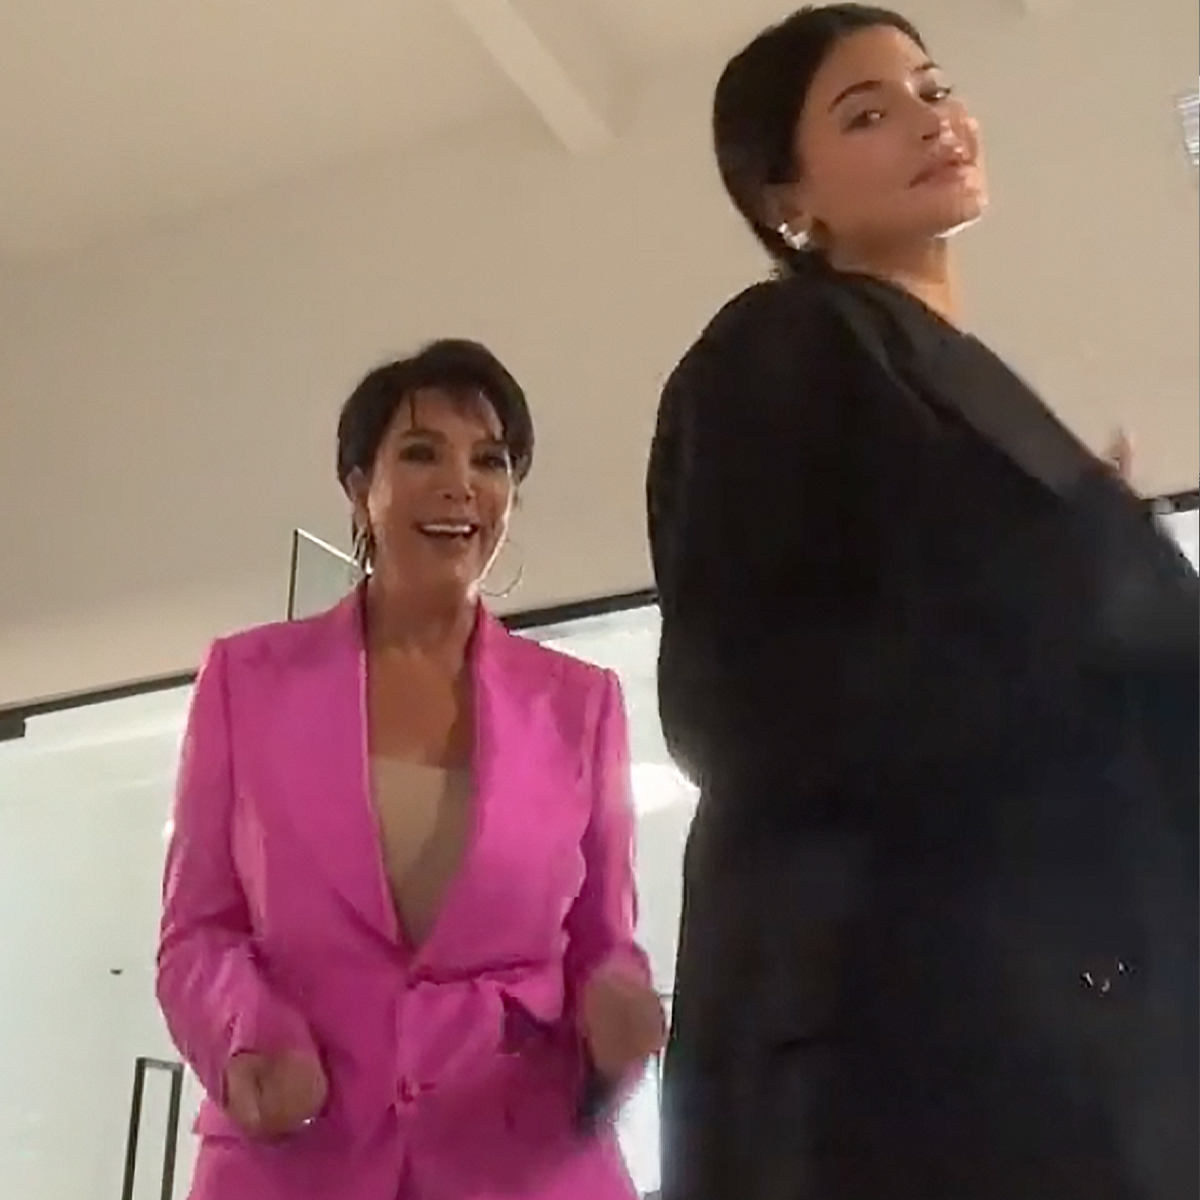 Kylie Jenner Dances With Kris Jenner in Tribute Video to Mom